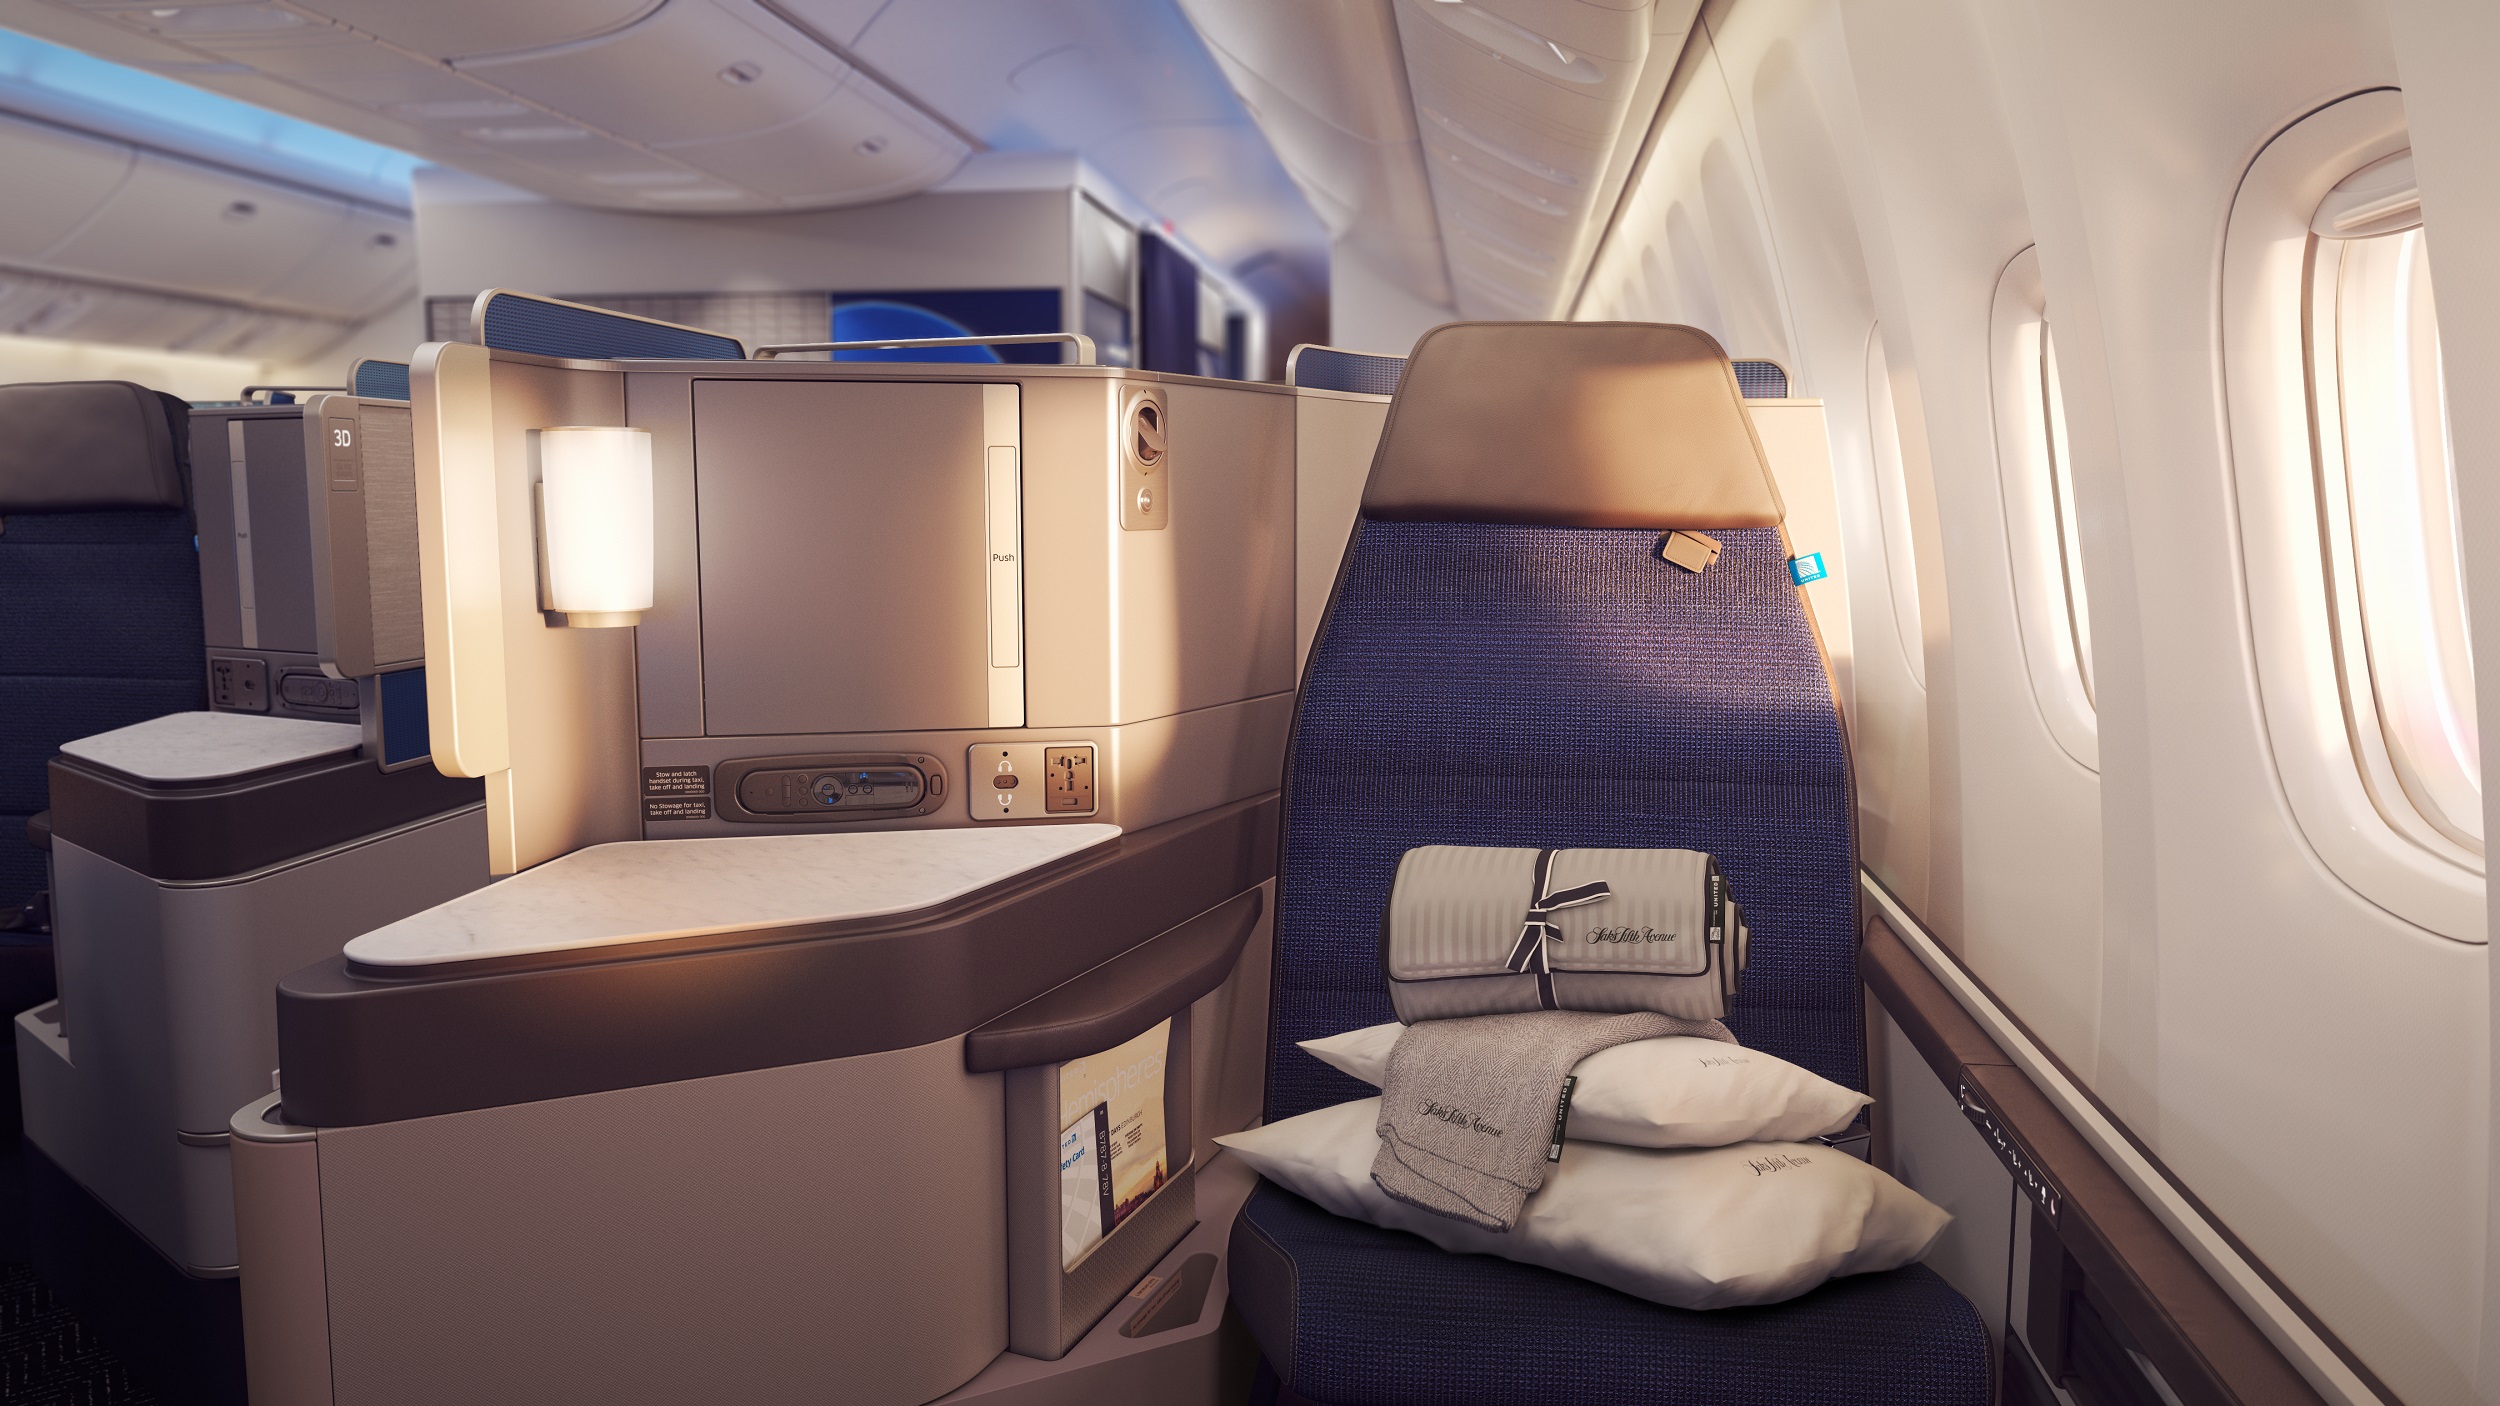 United's Polaris Business class seat with Saks bedding